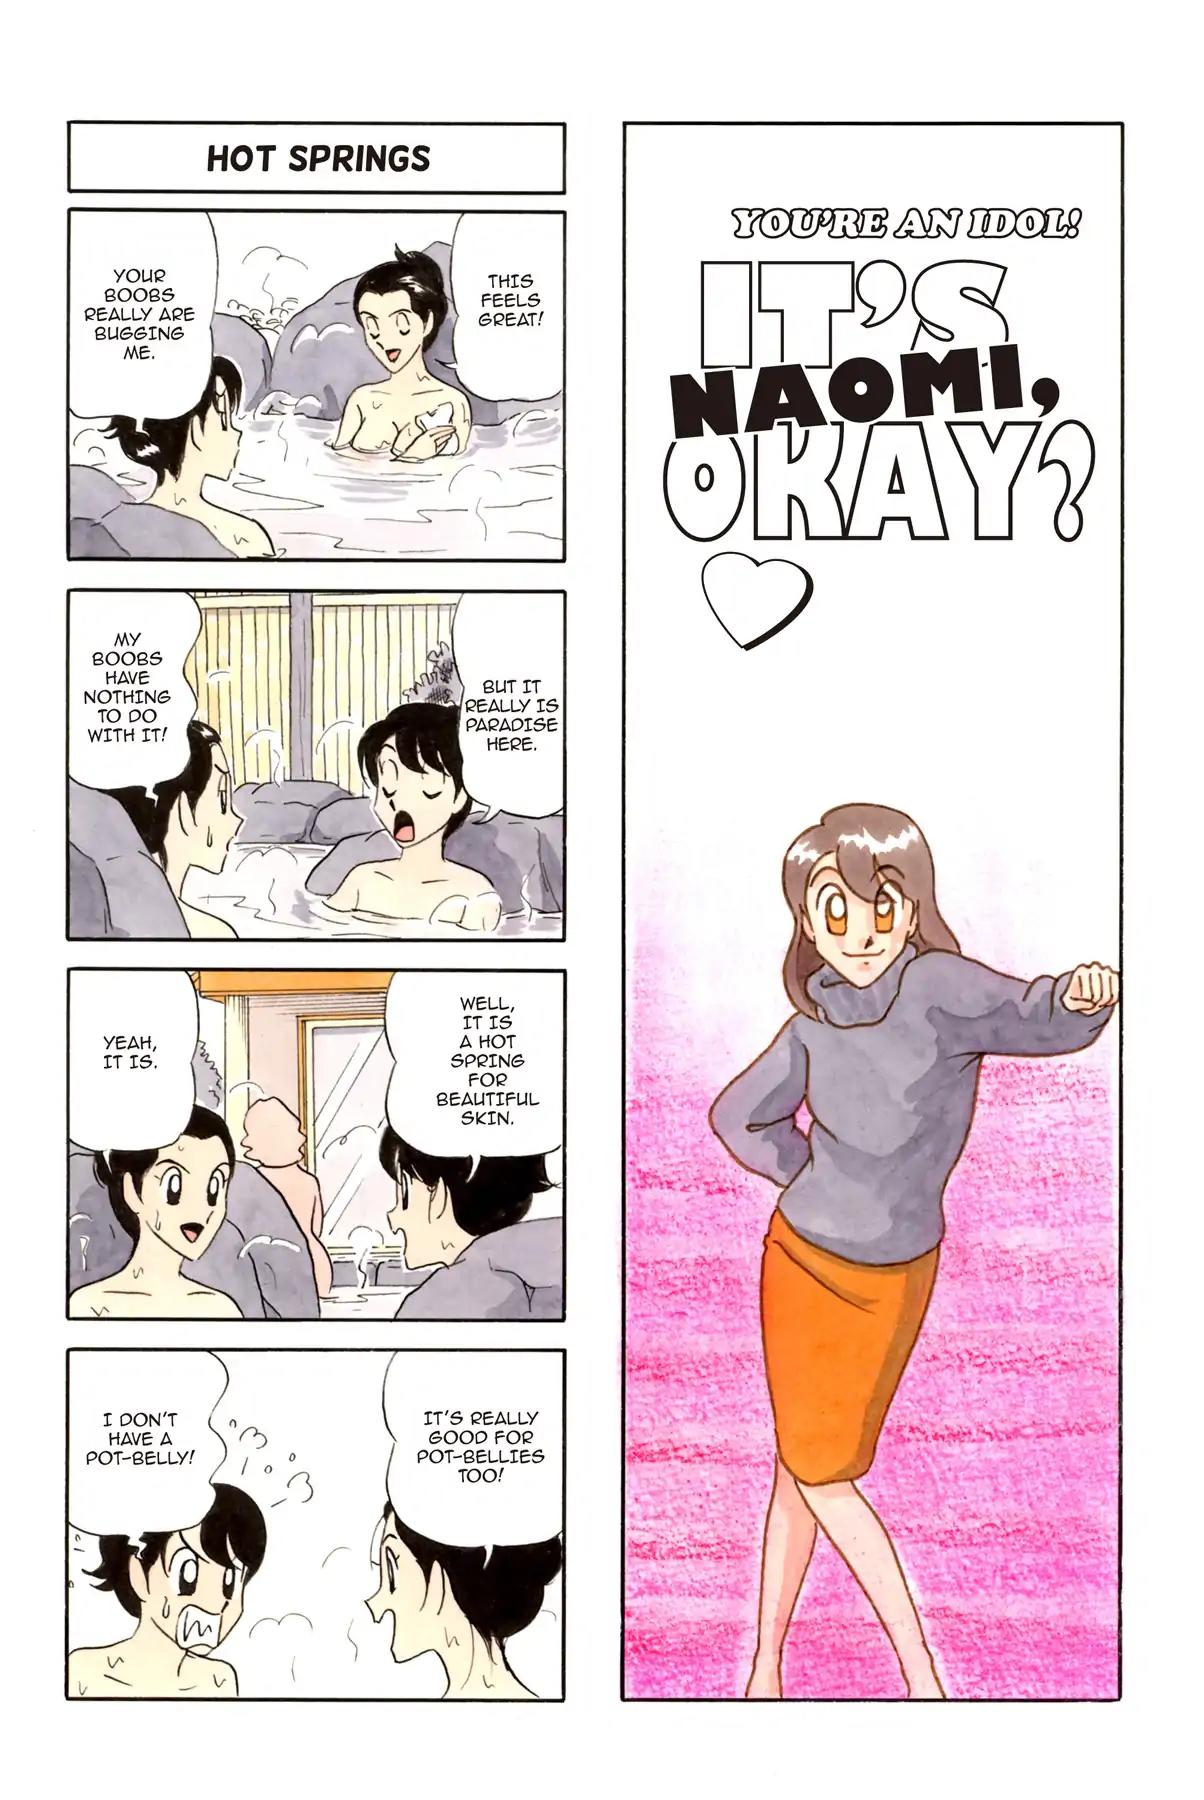 It's Naomi, Okay? After 16 Vol 1 Chapter 16